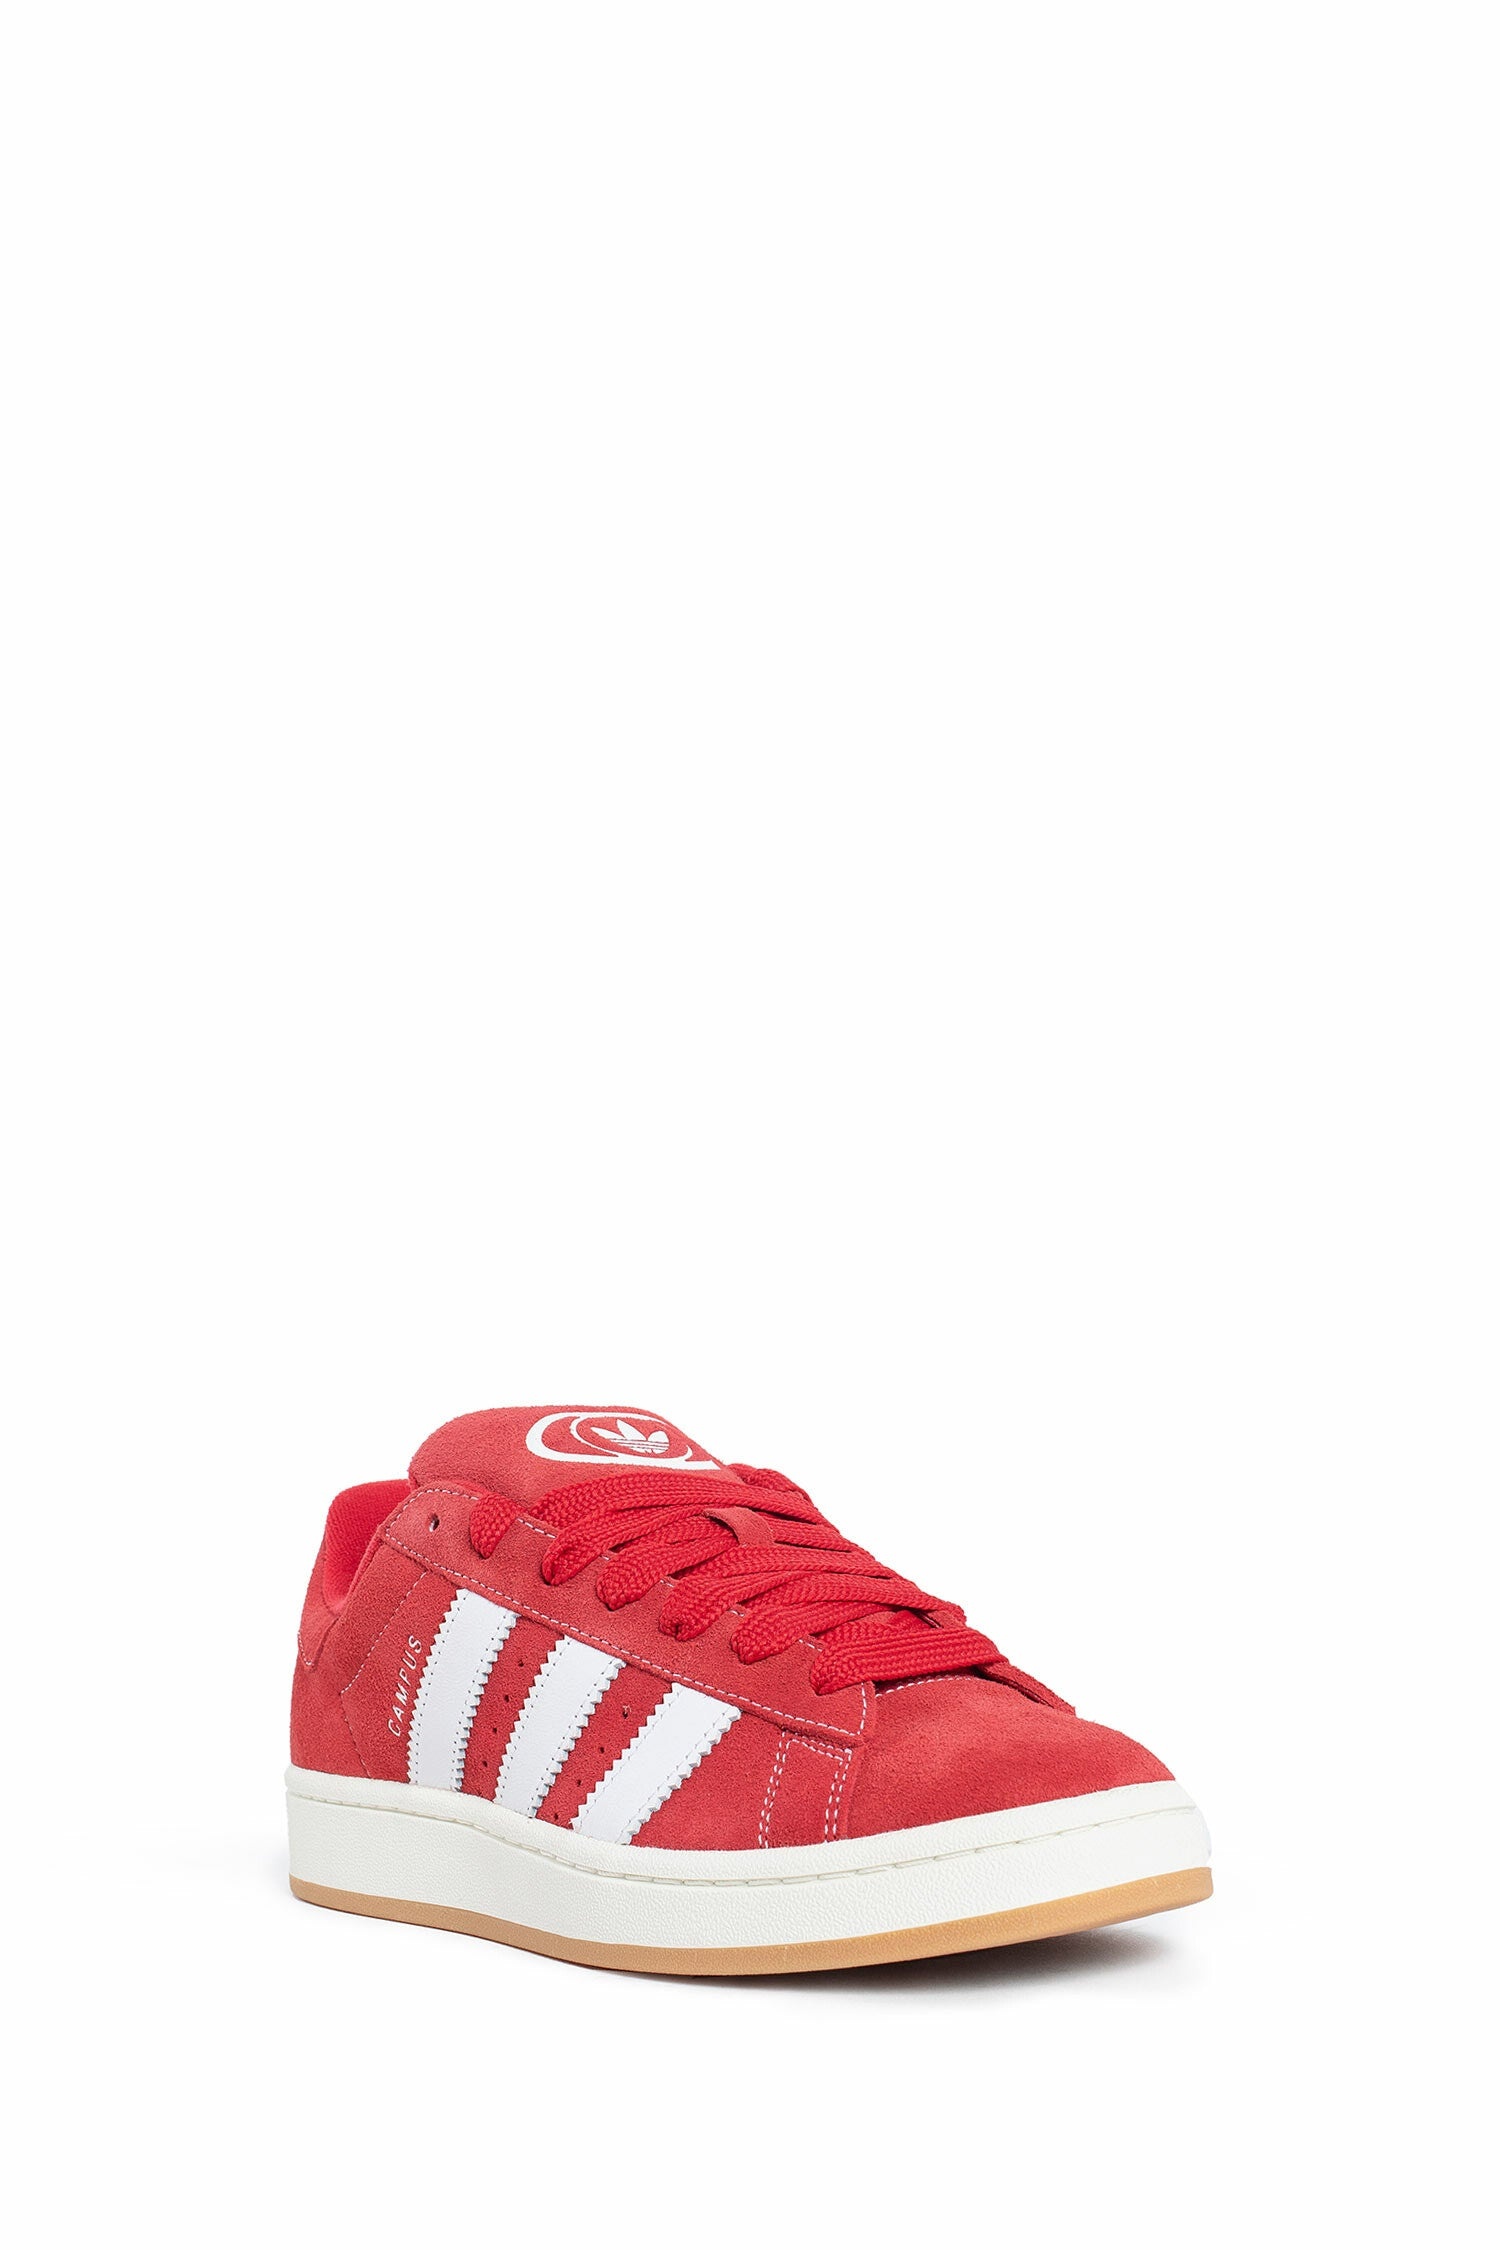 ADIDAS UNISEX RED SNEAKERS - 2